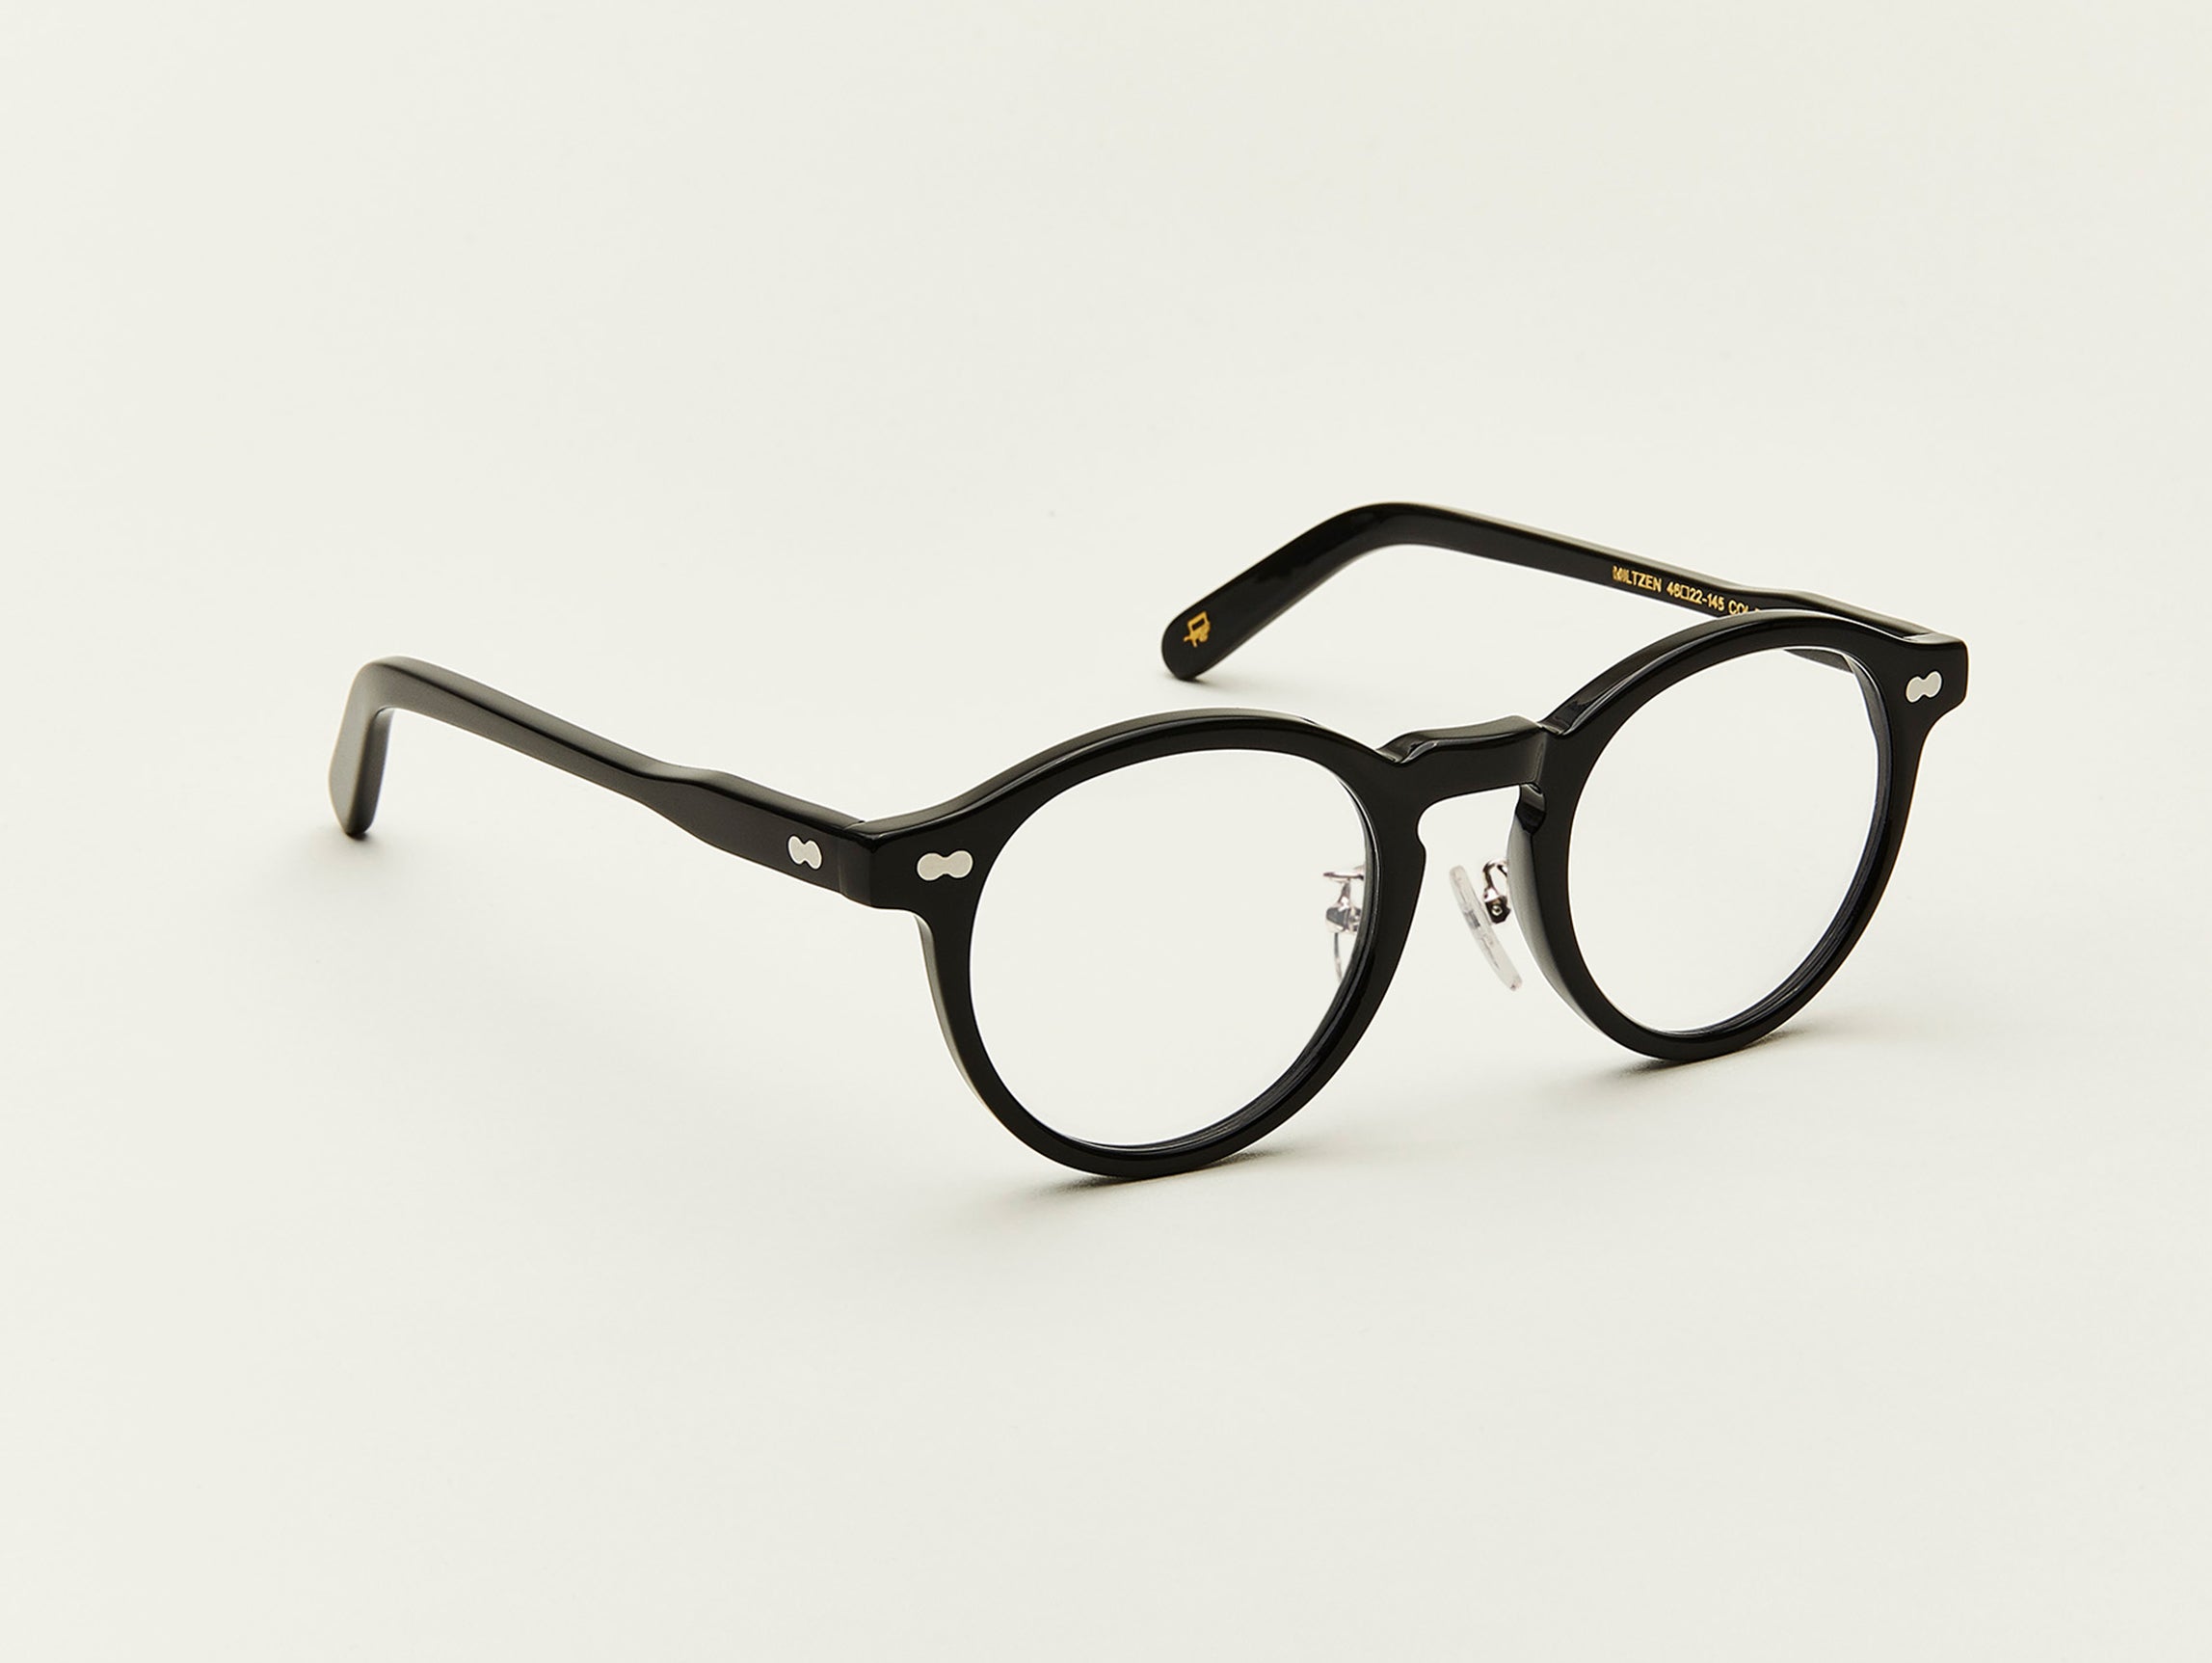 MILTZEN W/ Metal Nose Pads | Round Glasses – MOSCOT NYC SINCE 1915